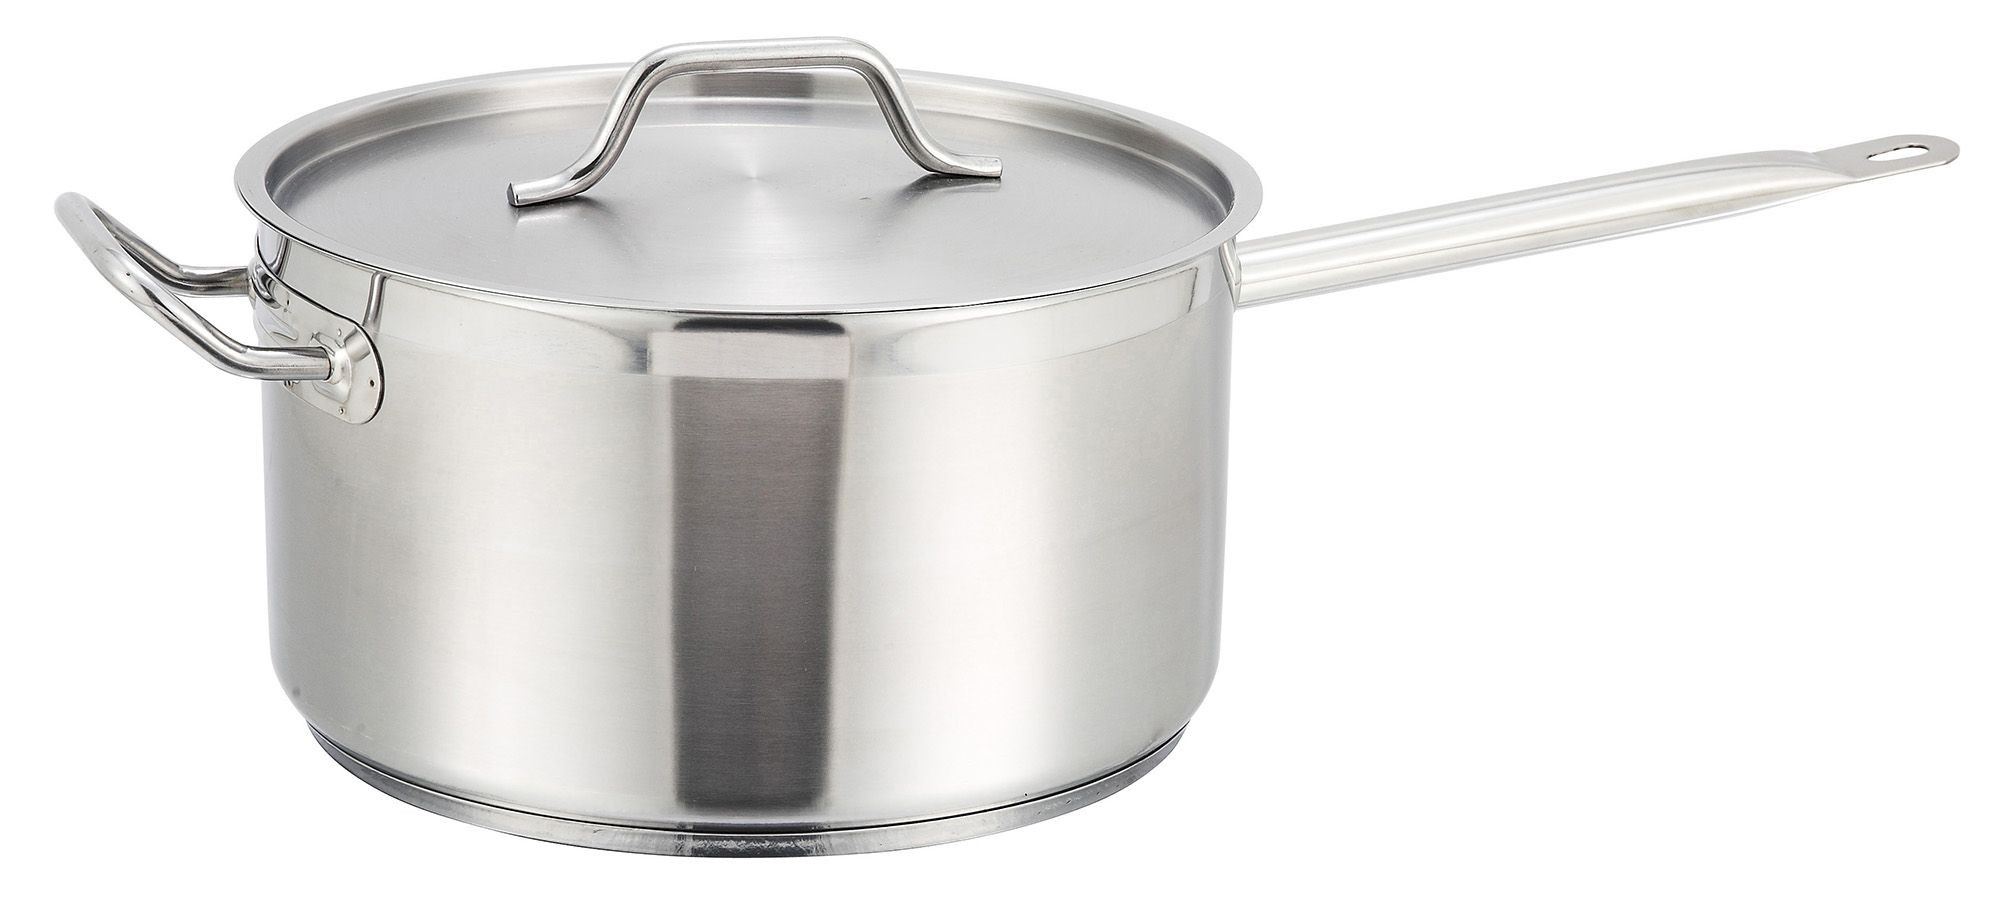 Winco SSSP-10 Premium Induction Stainless Steel 10 Qt. Sauce Pan with Cover